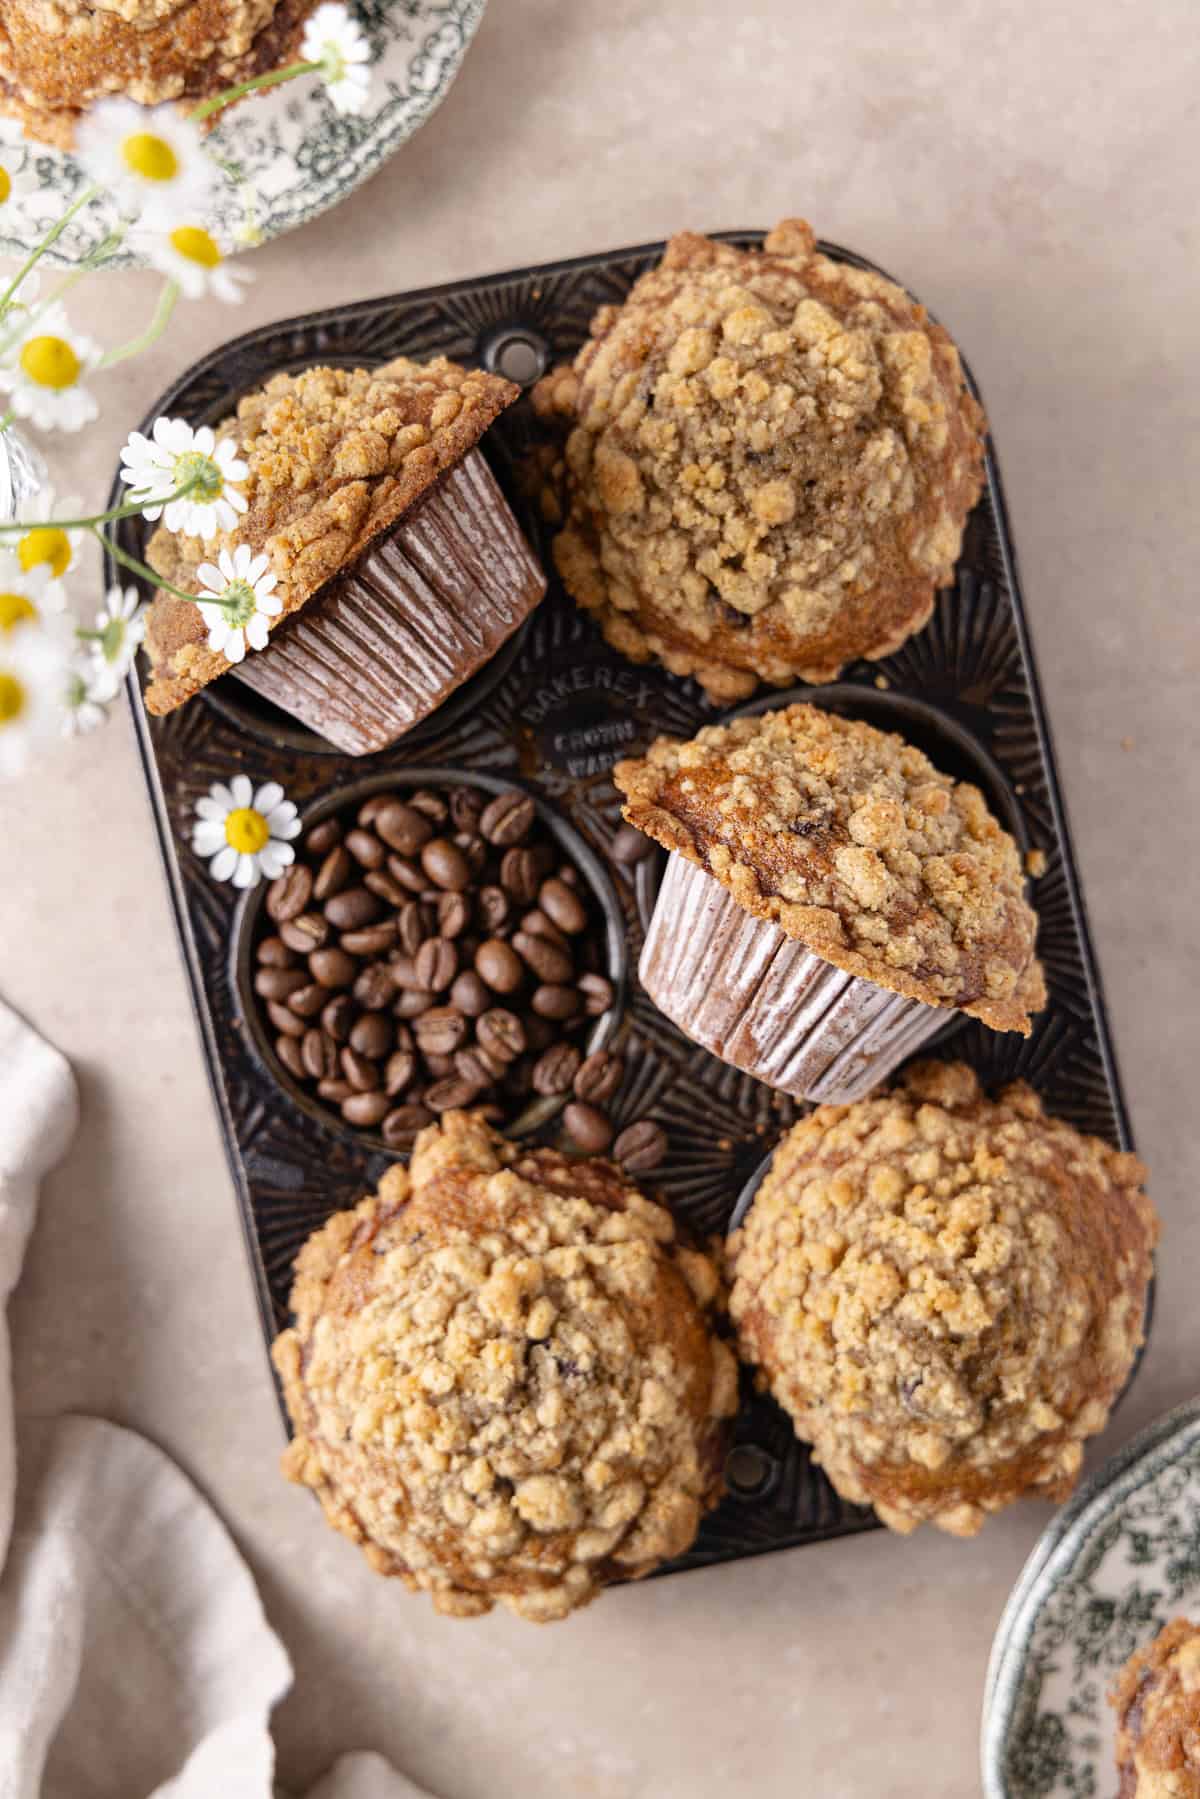 Banana Espresso Muffins in a 6-cup muffin pan, with plates all around and a beige napkin in the bottom left corner.